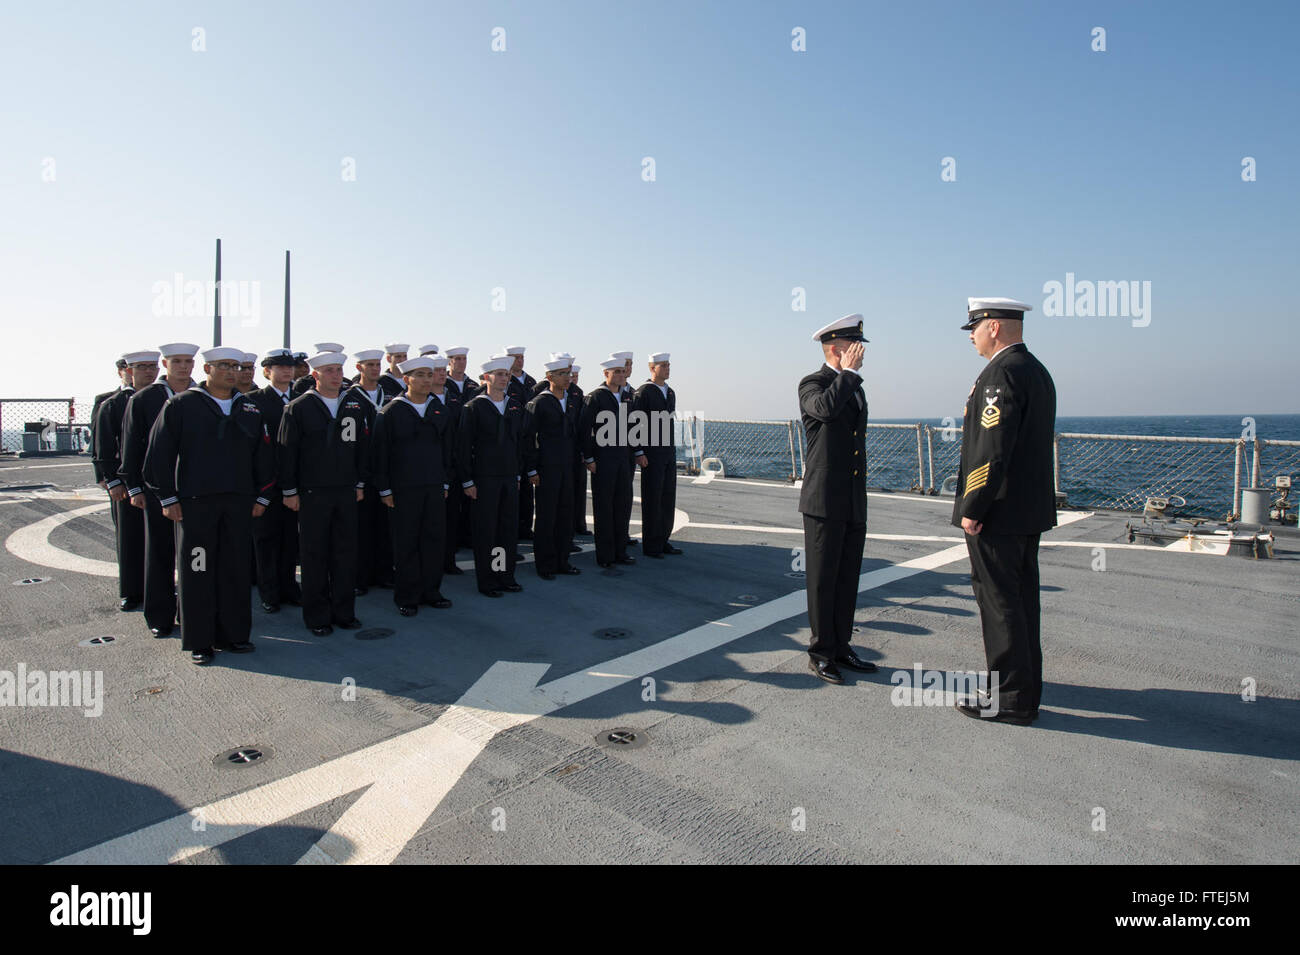 BLACK SEA (Nov. 6, 2014) - Sailors aboard the USS Ross (DDG 71) conduct a dress blue uniform inspection. Ross is an Arleigh Burke-class guided-missile destroyer, homeported in Rota, Spain, conducting naval operations in the U.S. 6th Fleet area of operations in support of U.S. national security interest in Europe. Stock Photo